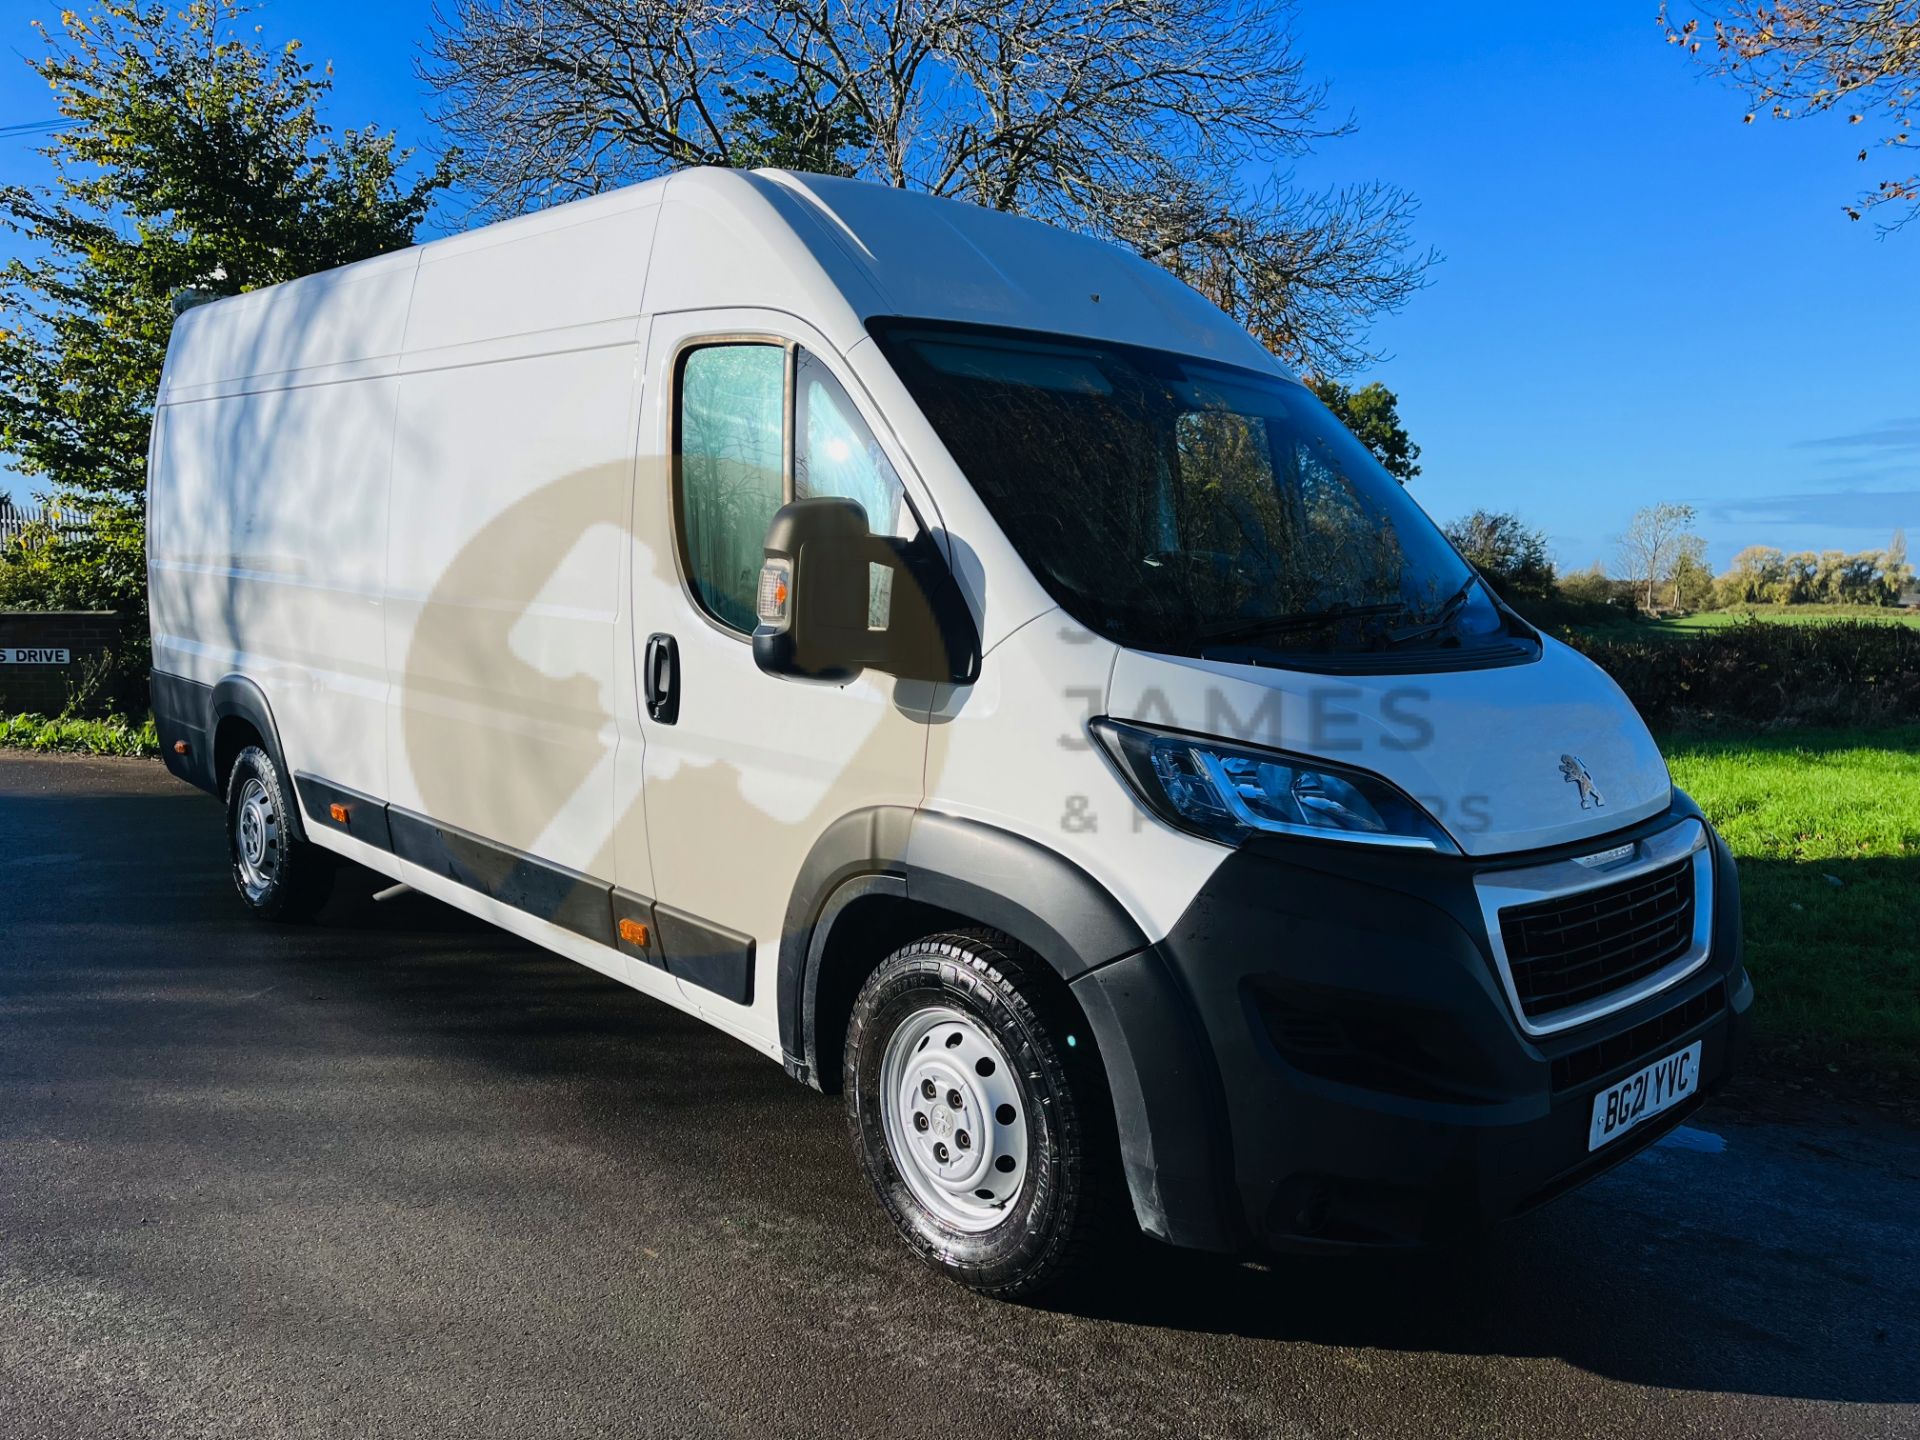 (ON SALE) PEUGEOT BOXER 2.2 BLUE-HDI "PROFESSIONAL" LWB MAXI 435 (2021 MODEL) SAT NAV (AIR CON) - Image 3 of 22